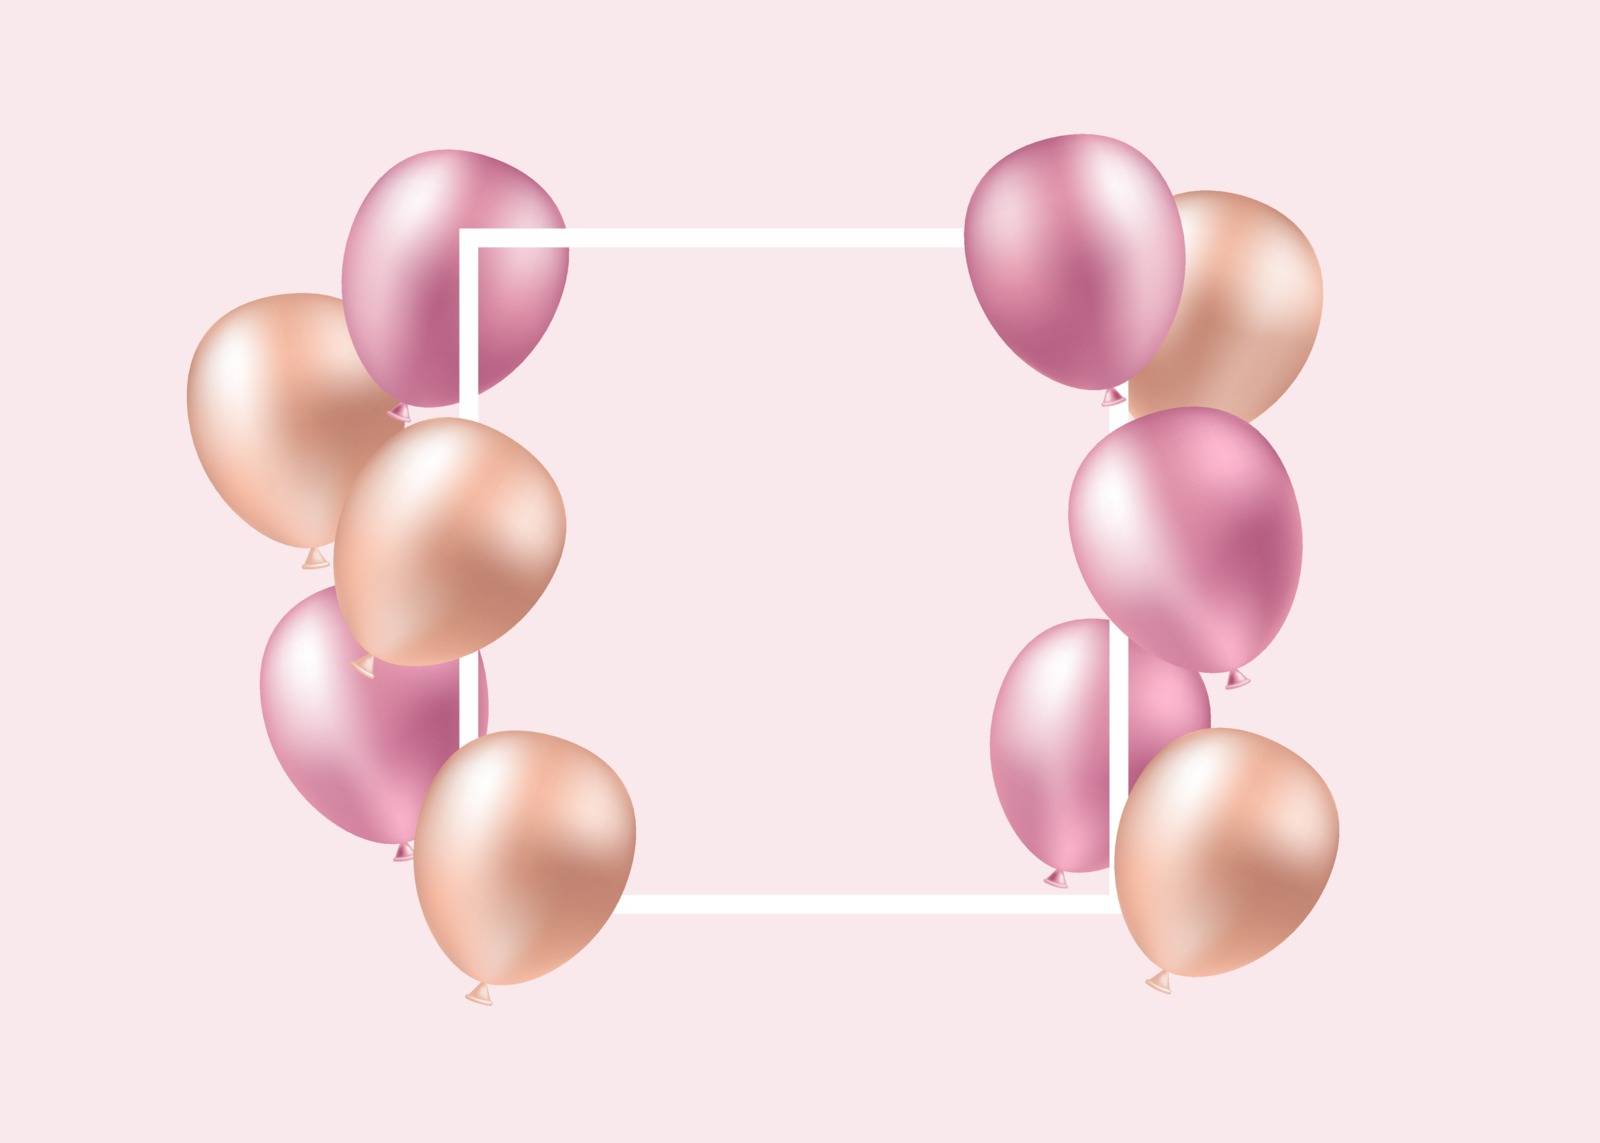 Illustration of blank place card with pink balloons by Helenshi